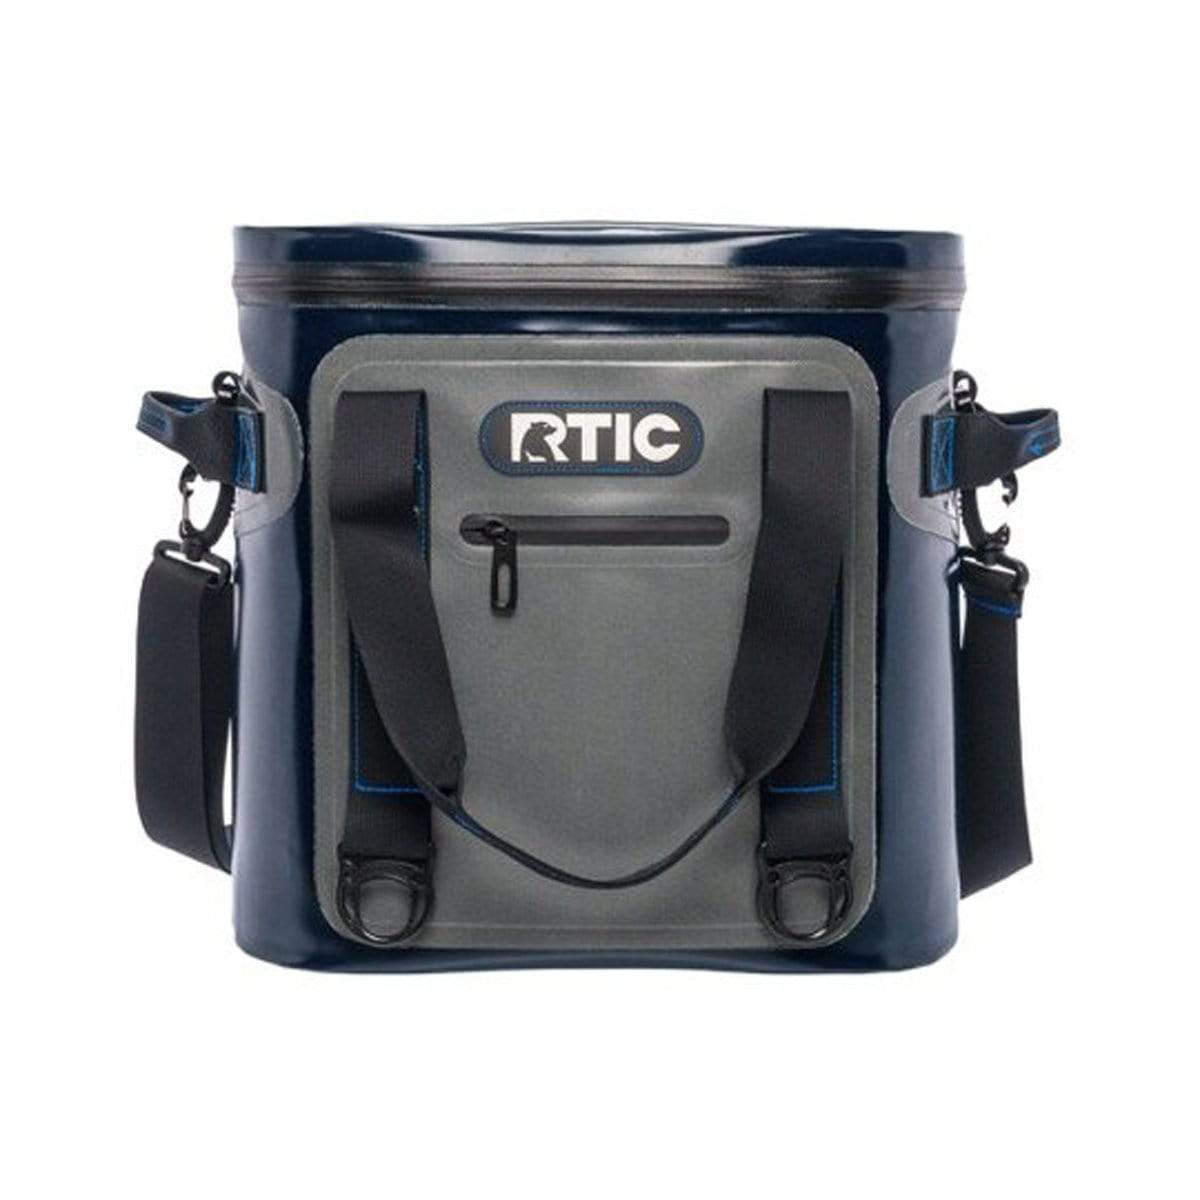 RTIC Soft Pack 20 Can Cooler